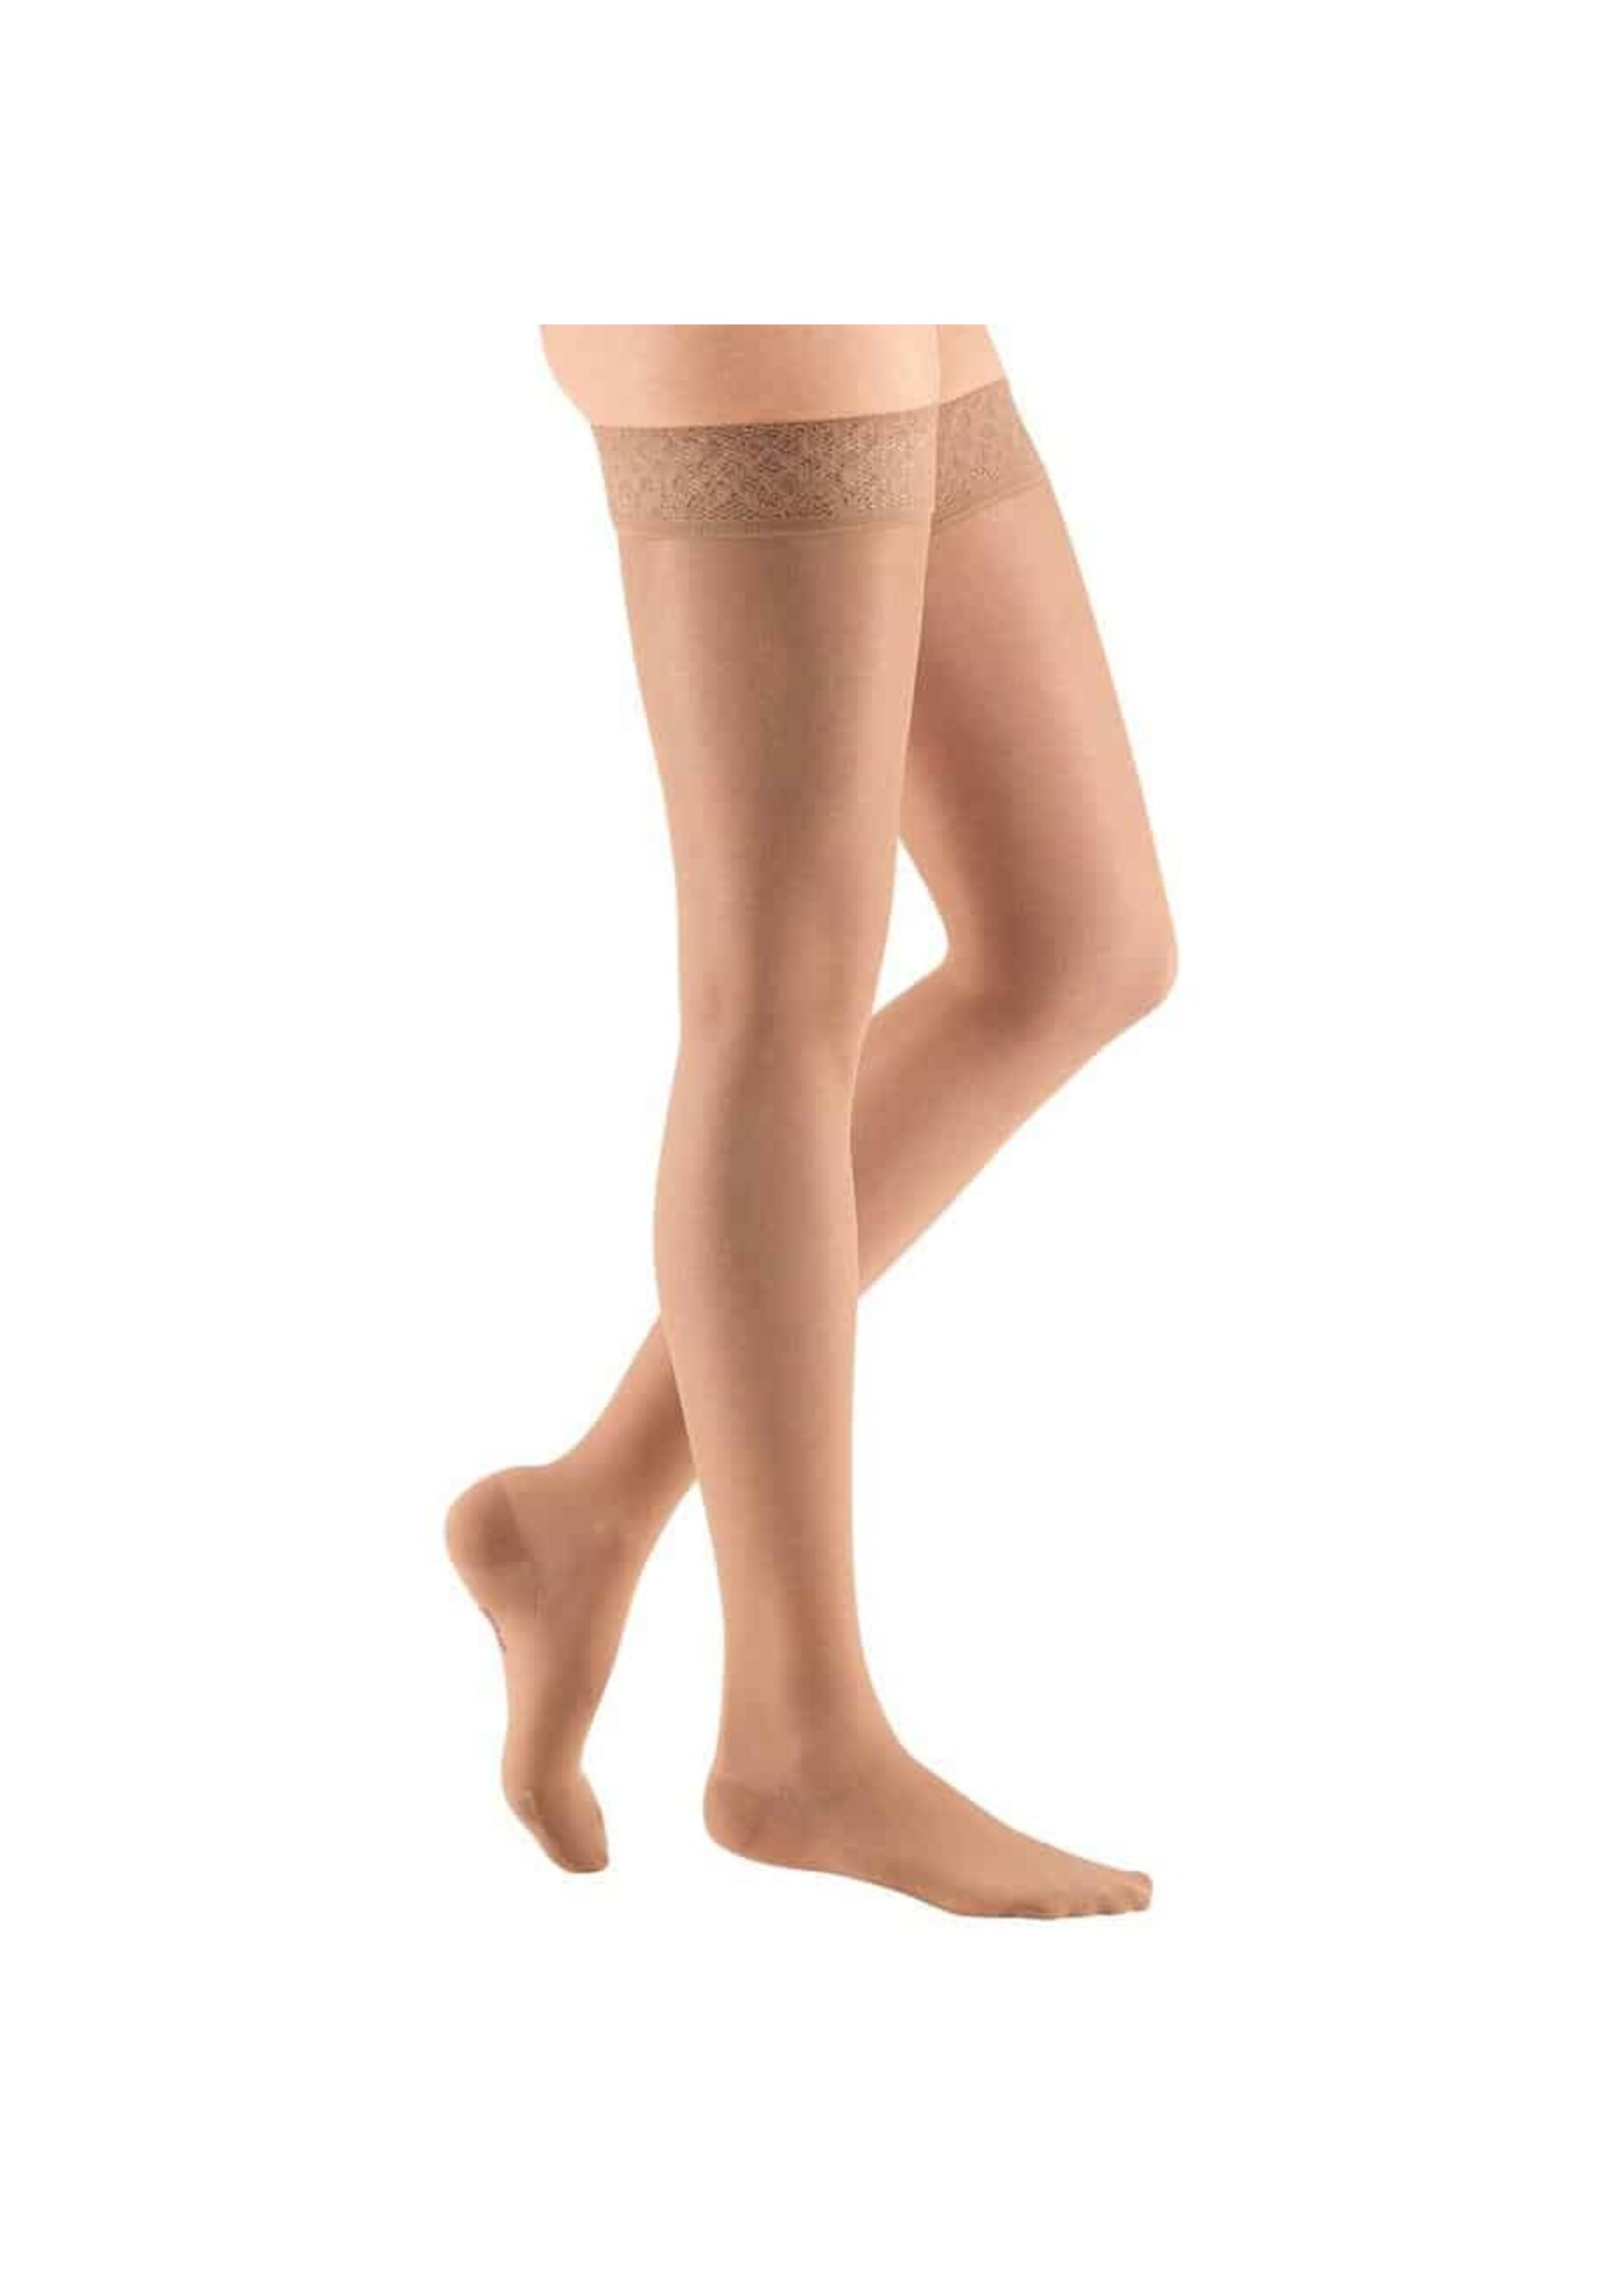 Medi USA Medi Mediven 430 20-30 mmhg Sheer And Soft Thigh With Top Band Closed Toe